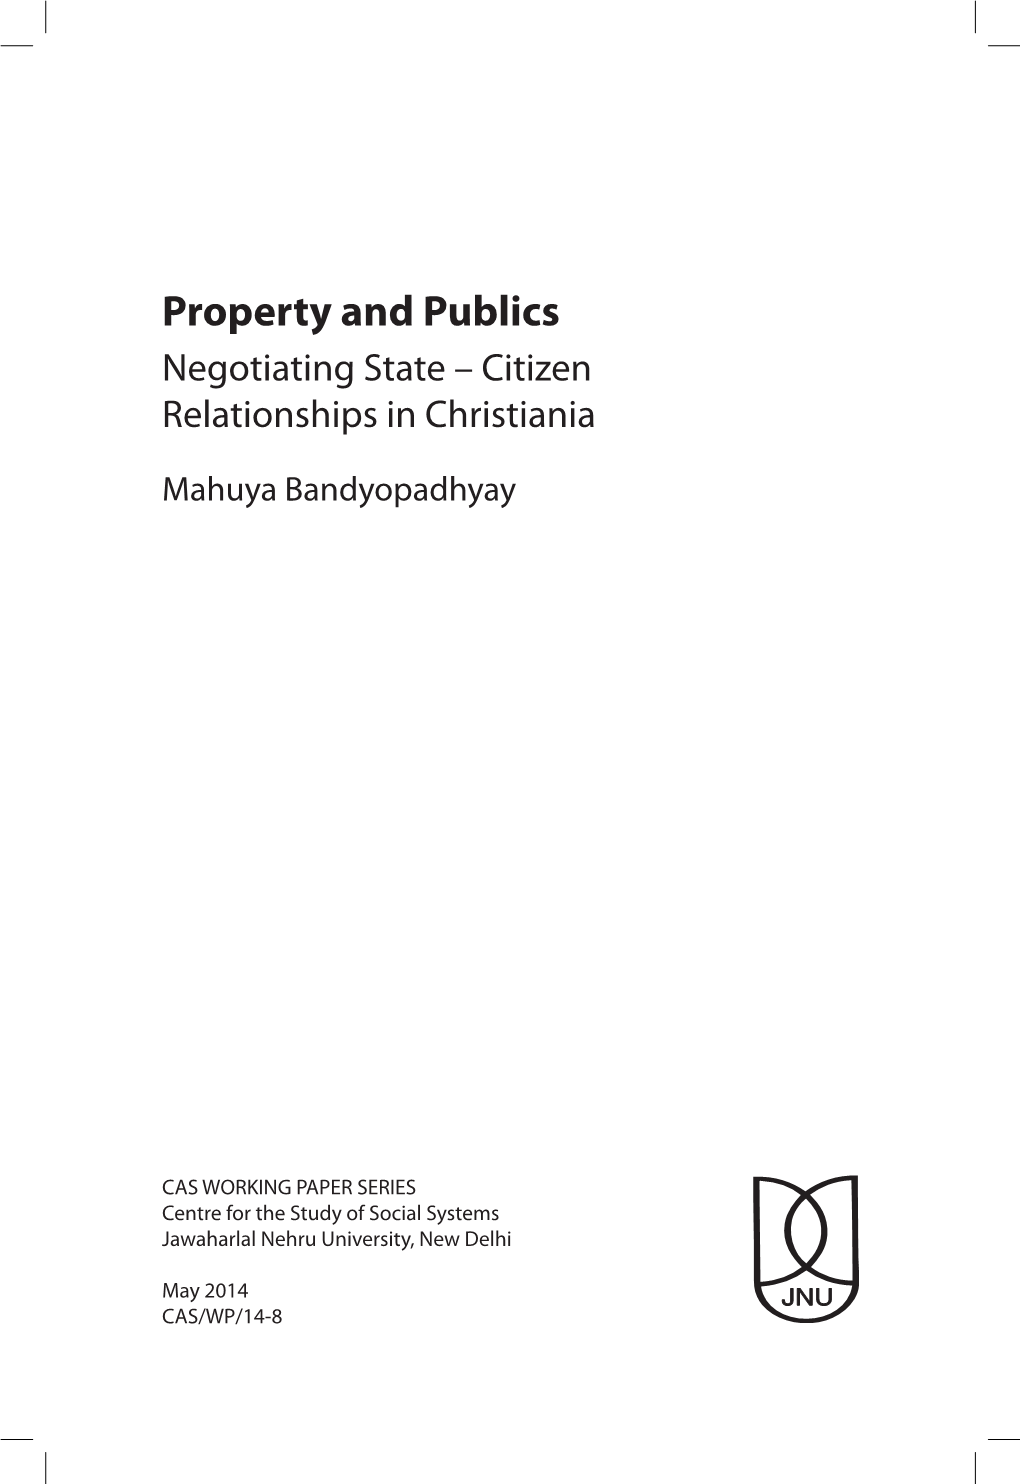 Property and Publics Negotiating State – Citizen Relationships in Christiania